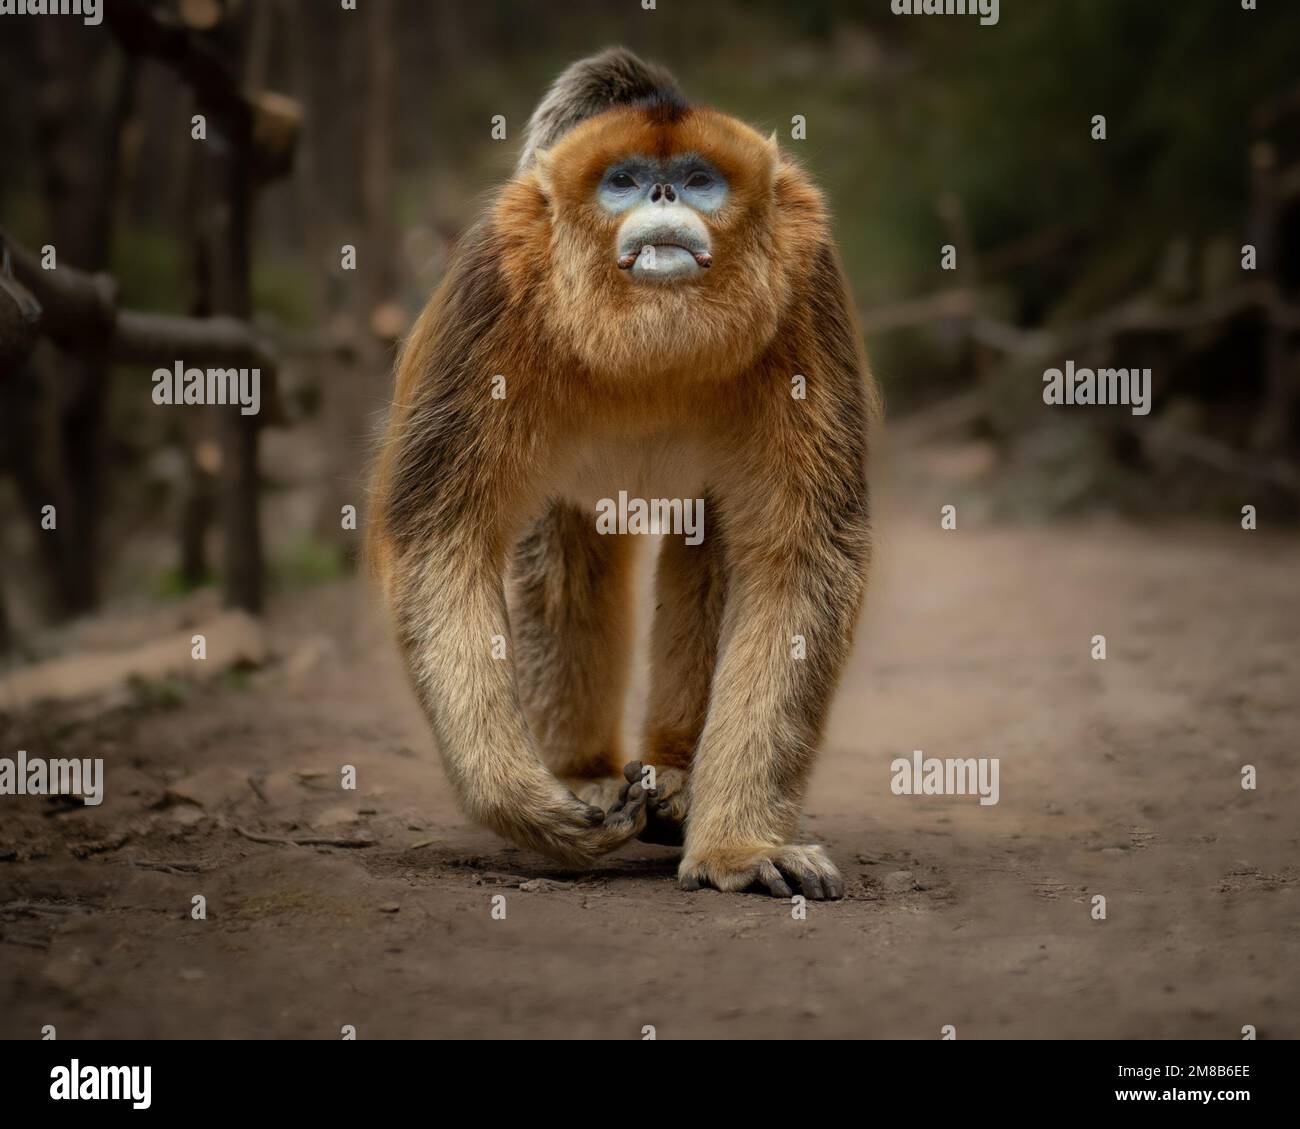 Strutting proud. China: THESE EXPRESSIVE images show wild snub-nosed monkey and their amazing range of emotions that have seen members of this species Stock Photo